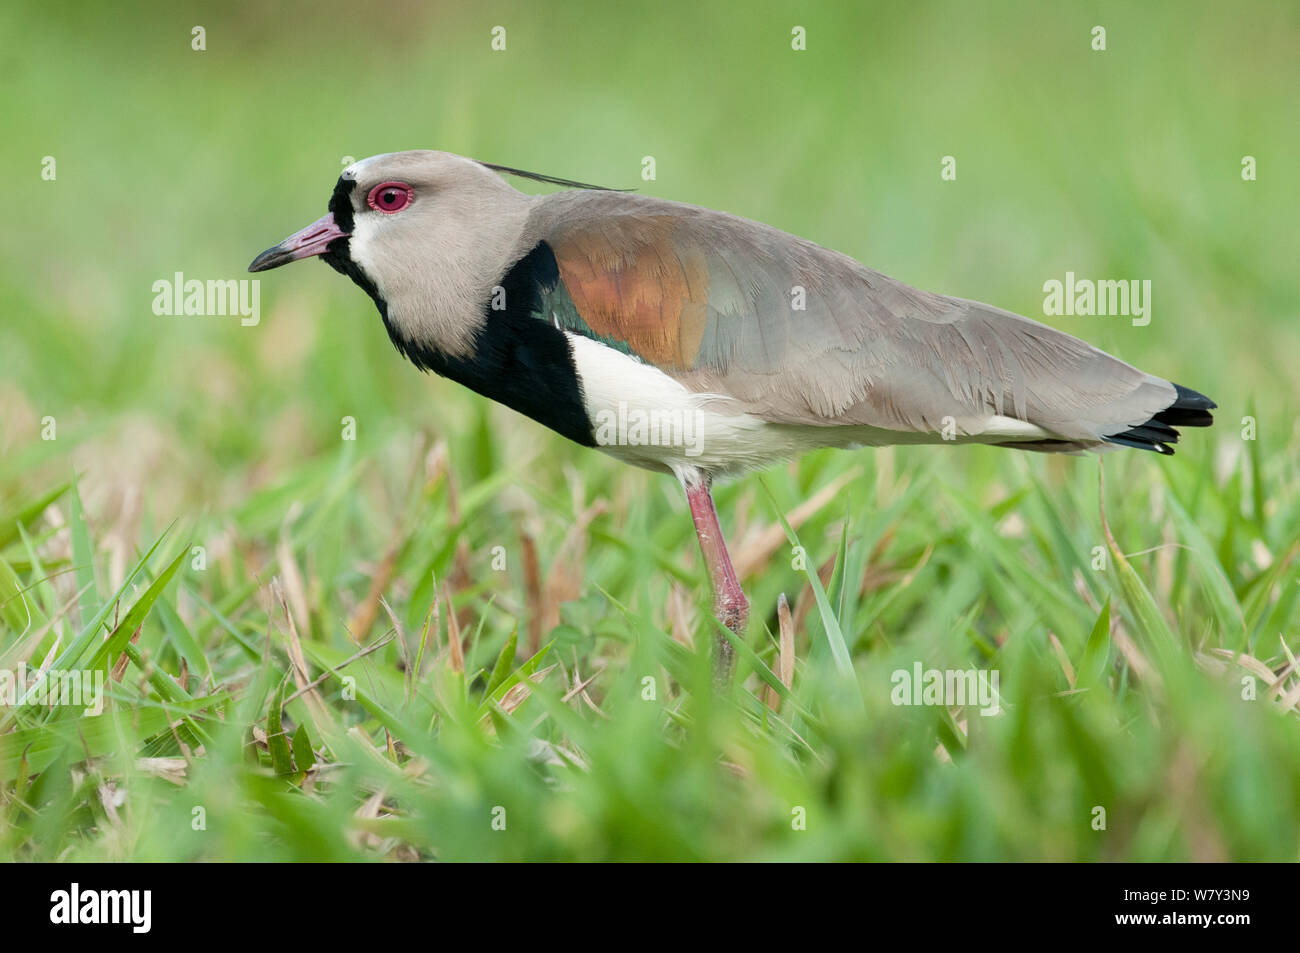 Male Southern Lapwing (Vanellus chilensis) displaying in grasslands. Chapada dos Guimaraes, Brazil, South America. Stock Photo